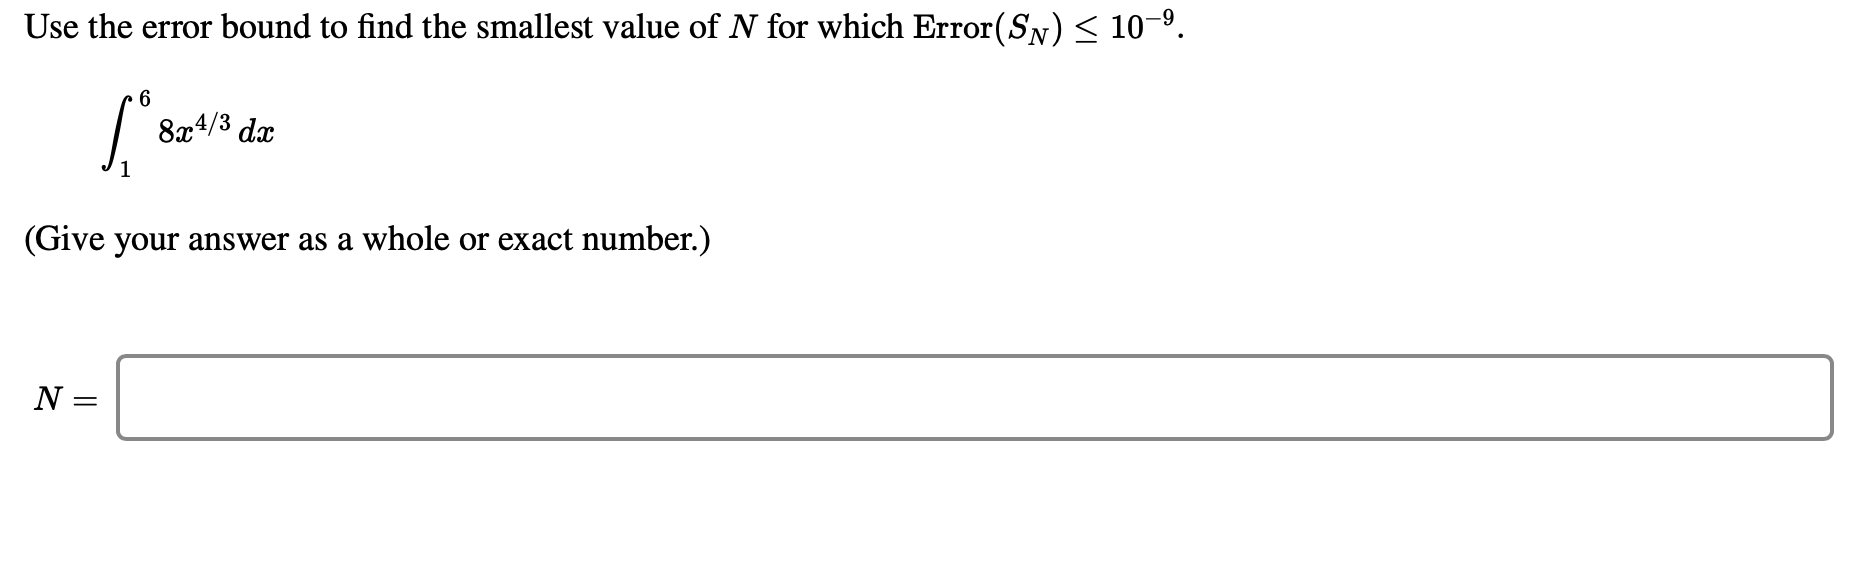 Use the error bound to find the smallest value of N for which Error(SN) < 10-9.
6
8x4/3 dx
(Give your answer as a whole or exact number.)
N =
